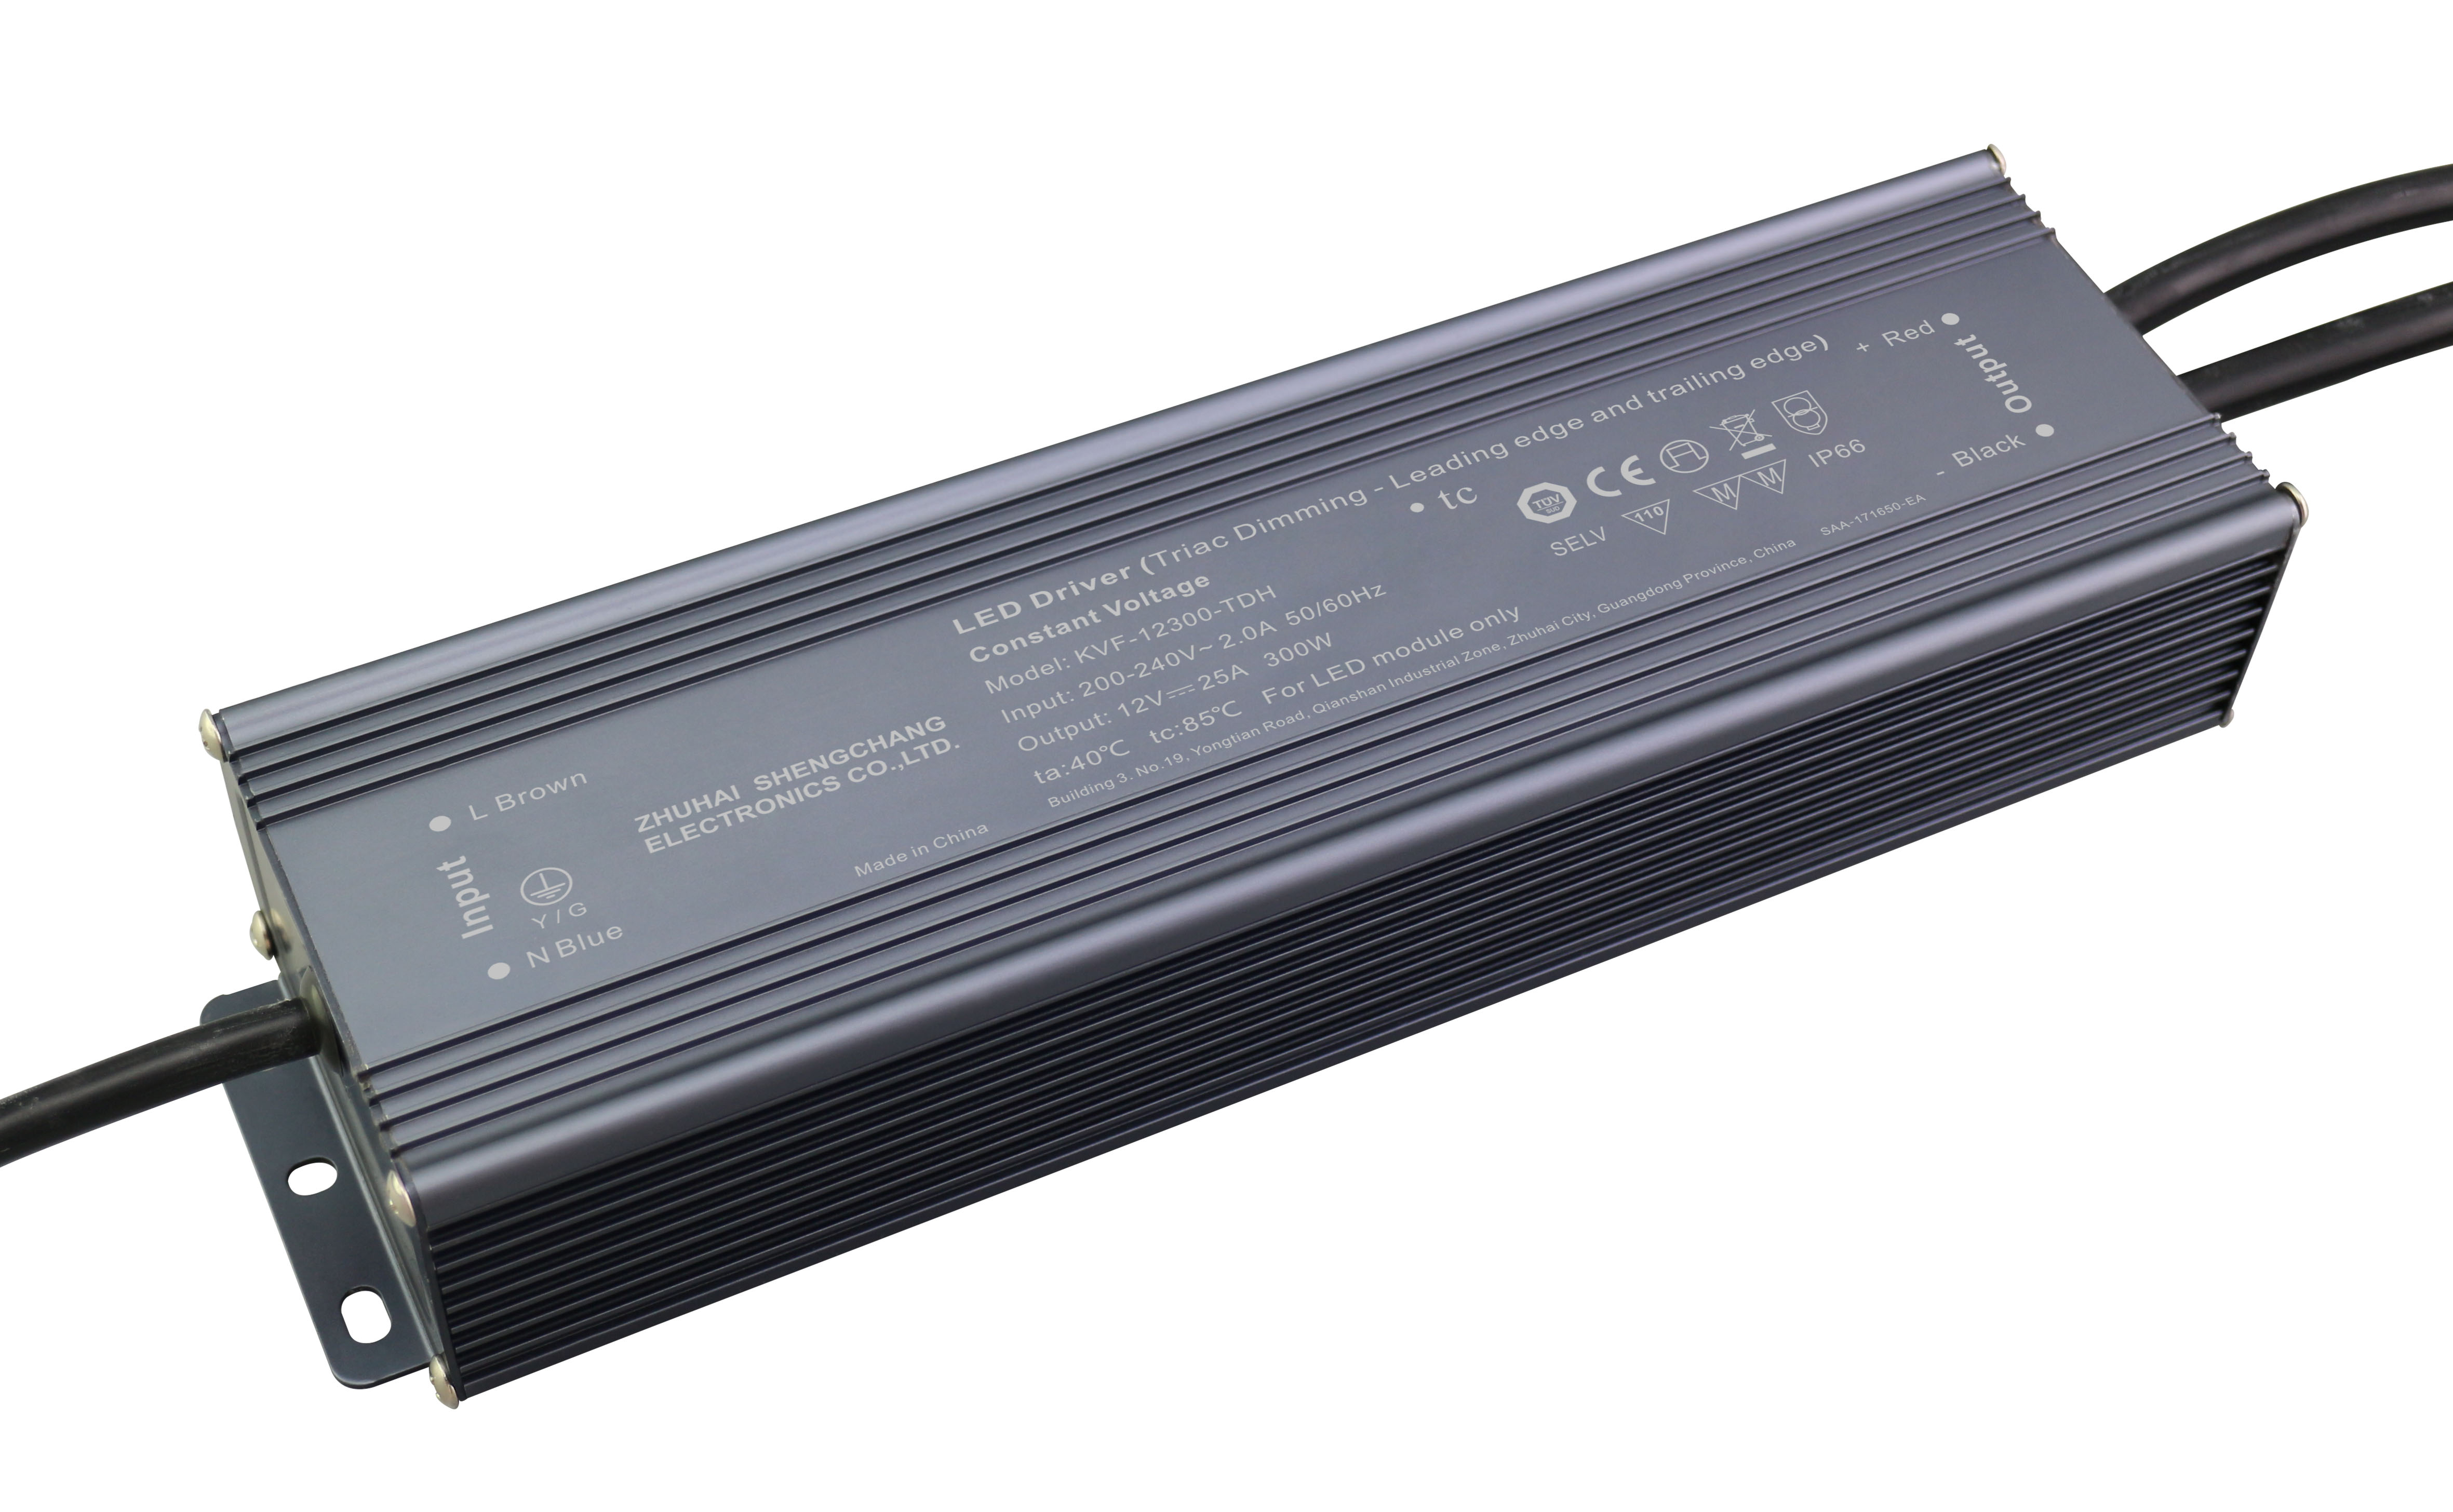 KVF-TDH series 300W Constant Voltage Triac Dimmable LED Driver